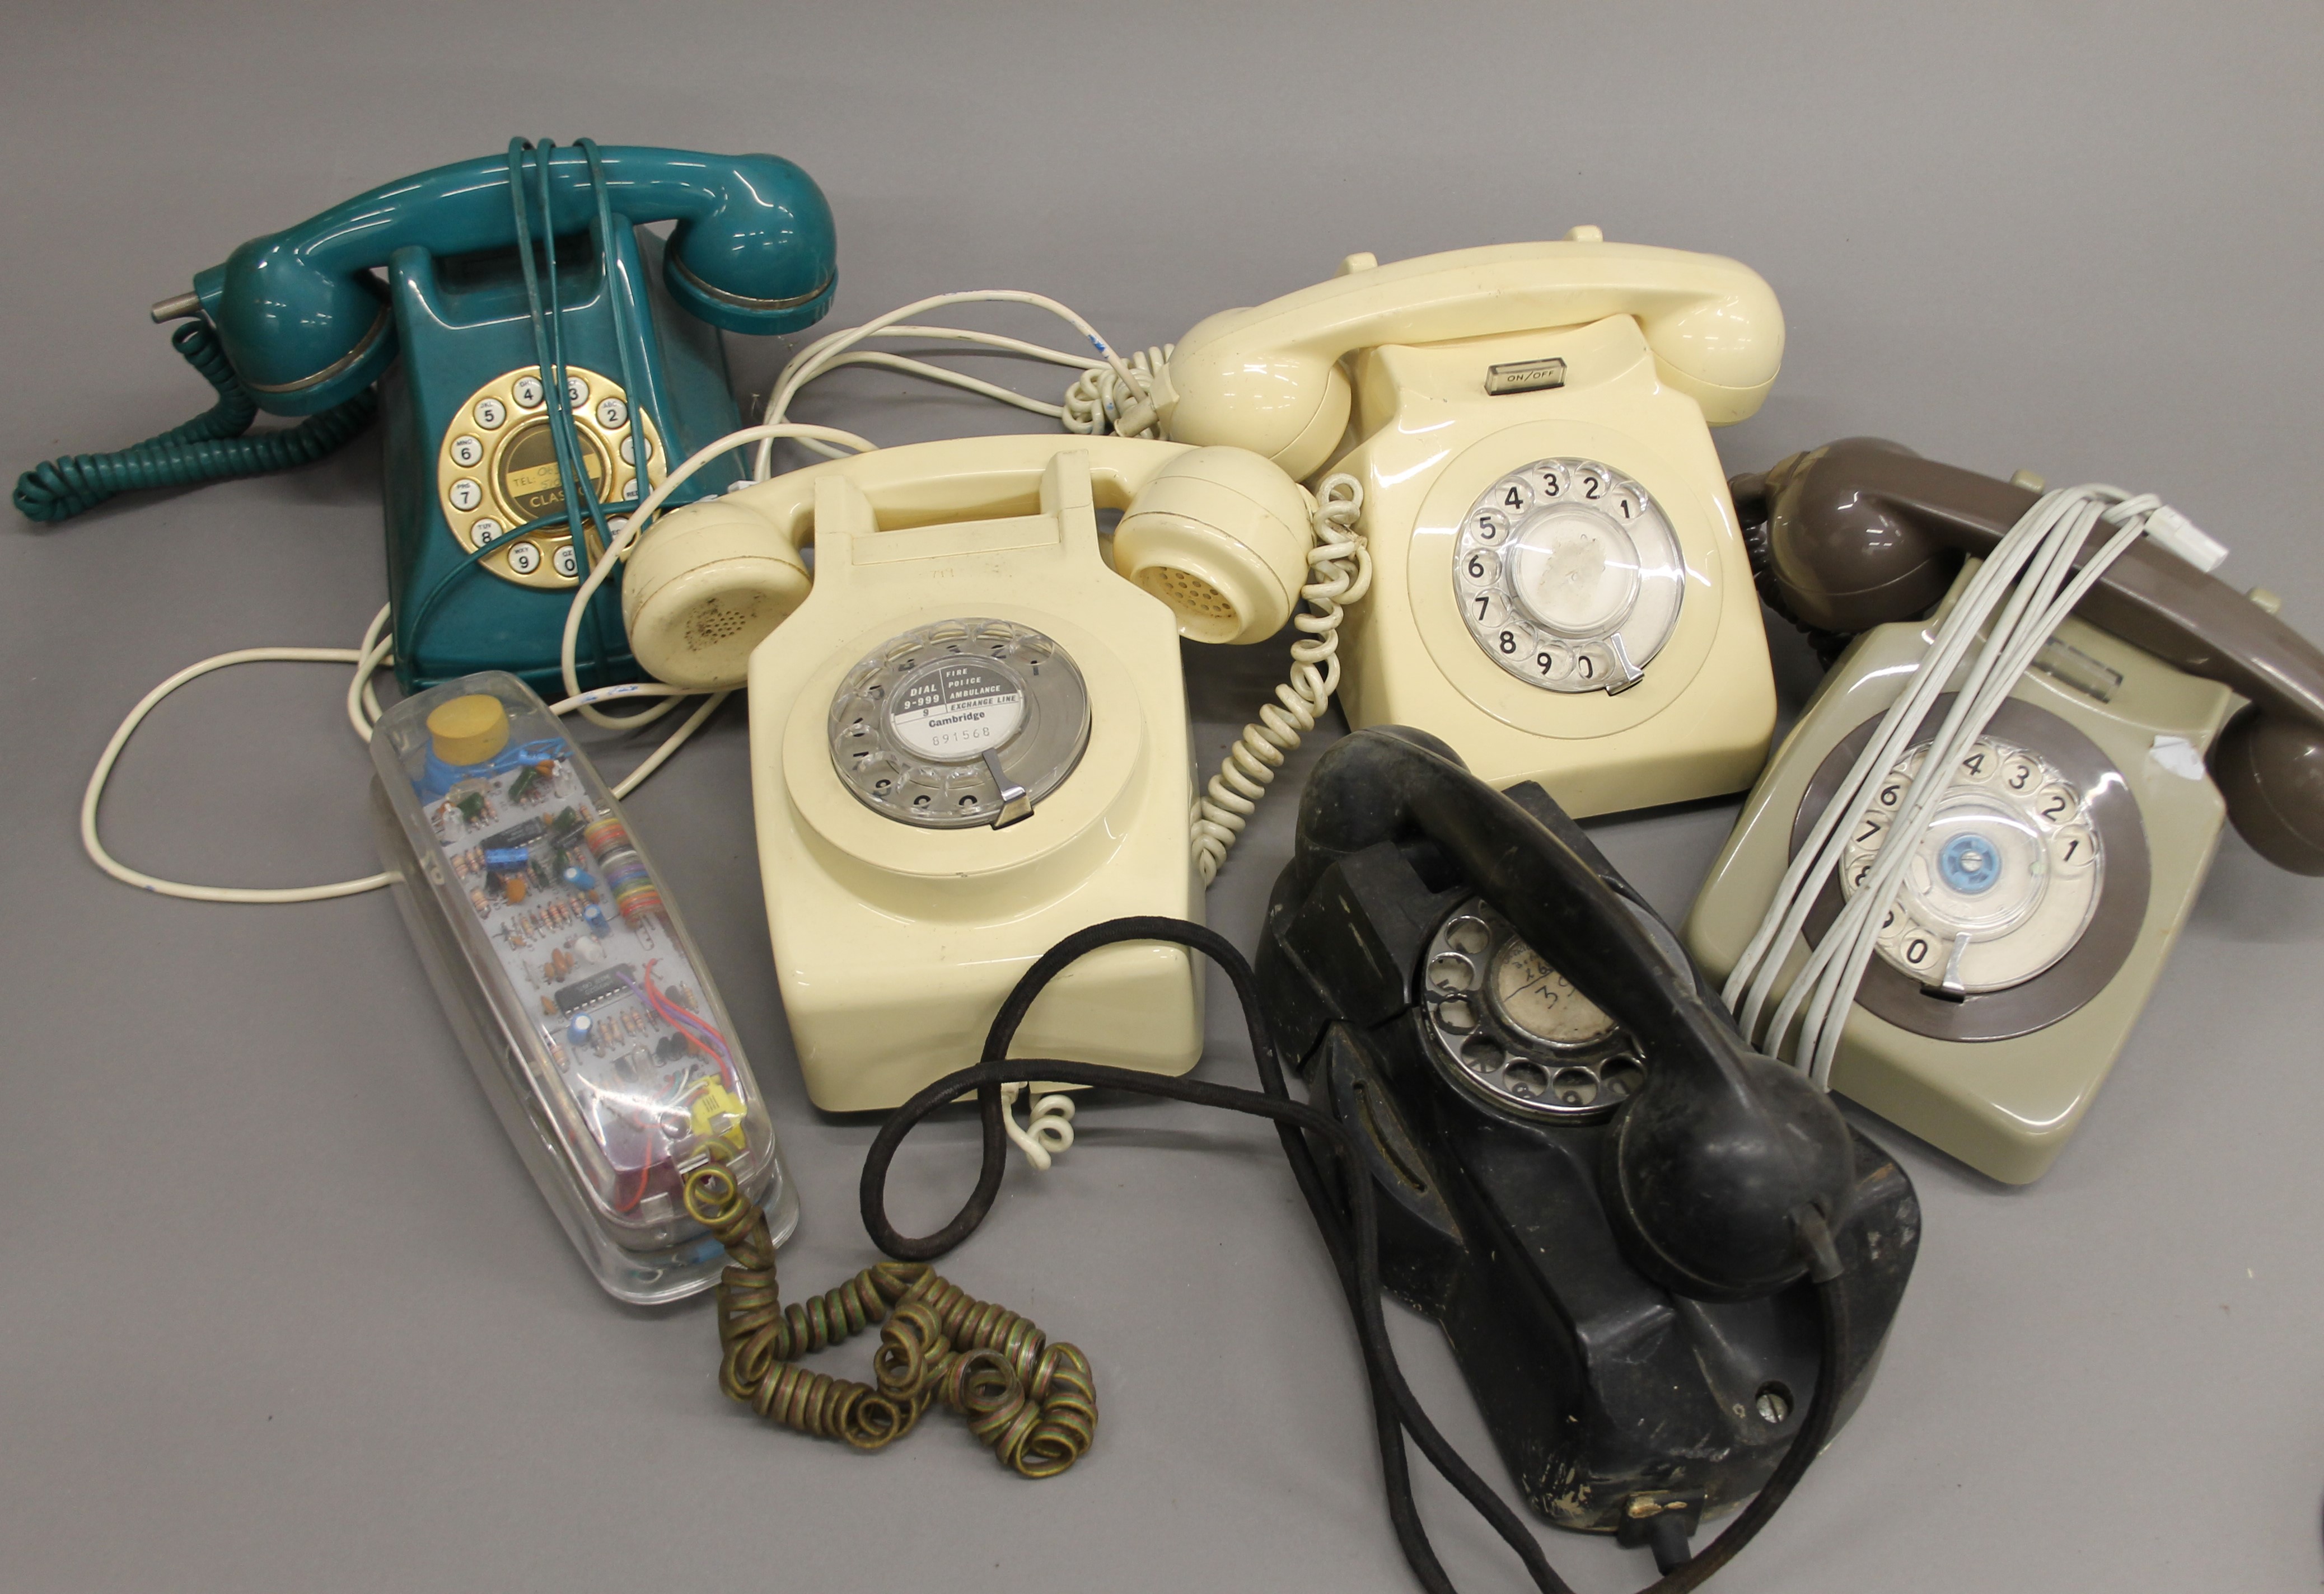 A box of various vintage telephones.